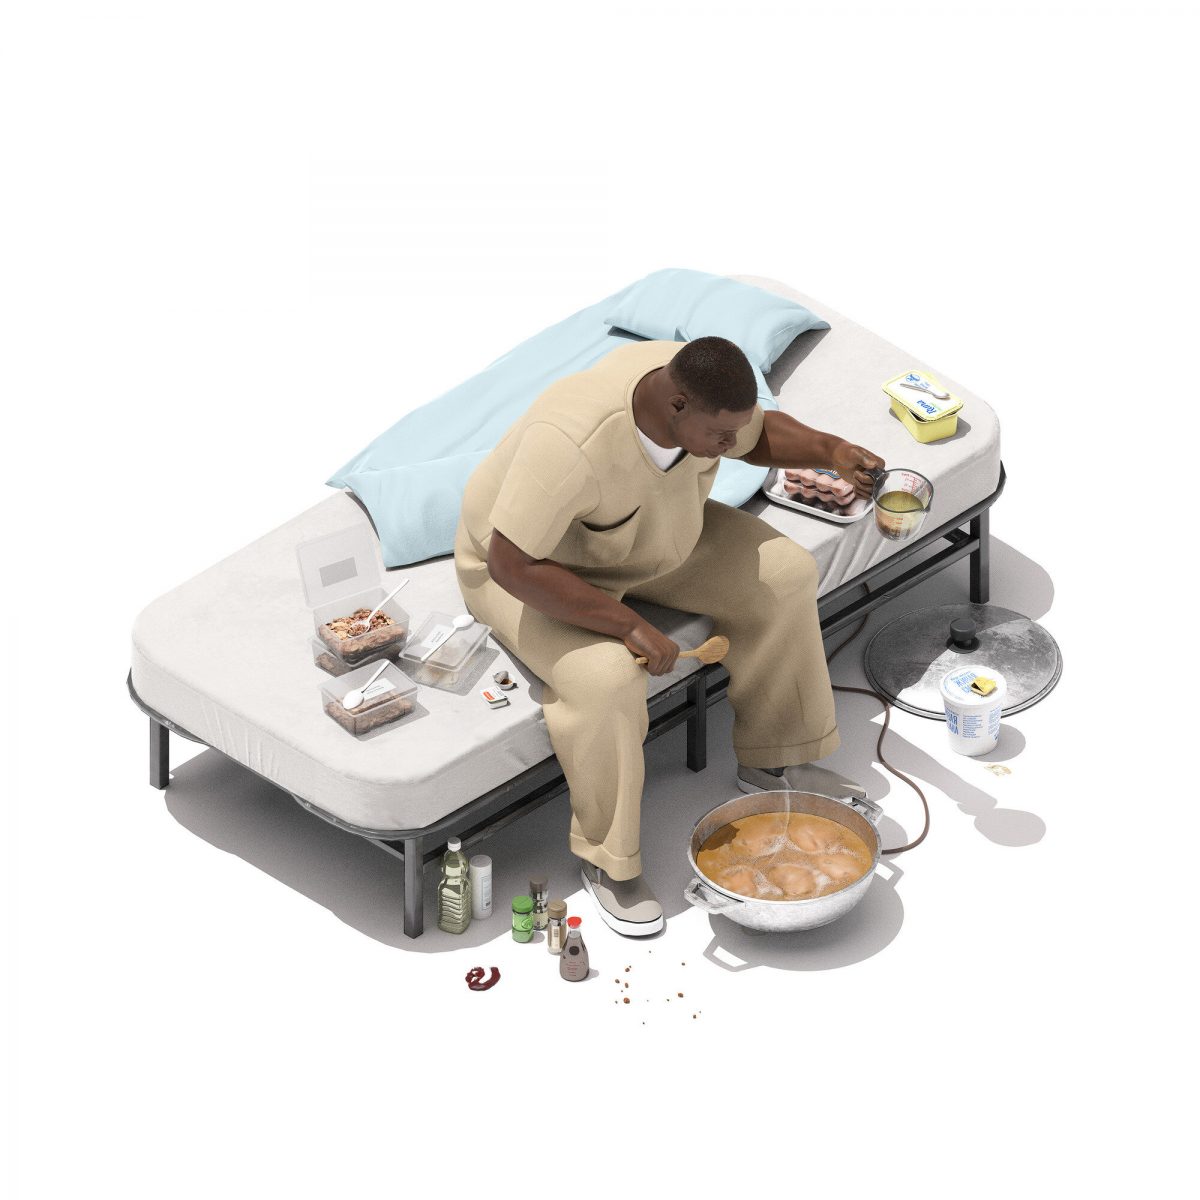 3D-style illustration of Courntey Sargent eating inside his cell. He sits on his unmade bed holding a wooden spoon and wearing his beige prison uniform and has various ingredients around him on the floor and bed while he cooks something in a silver pot.